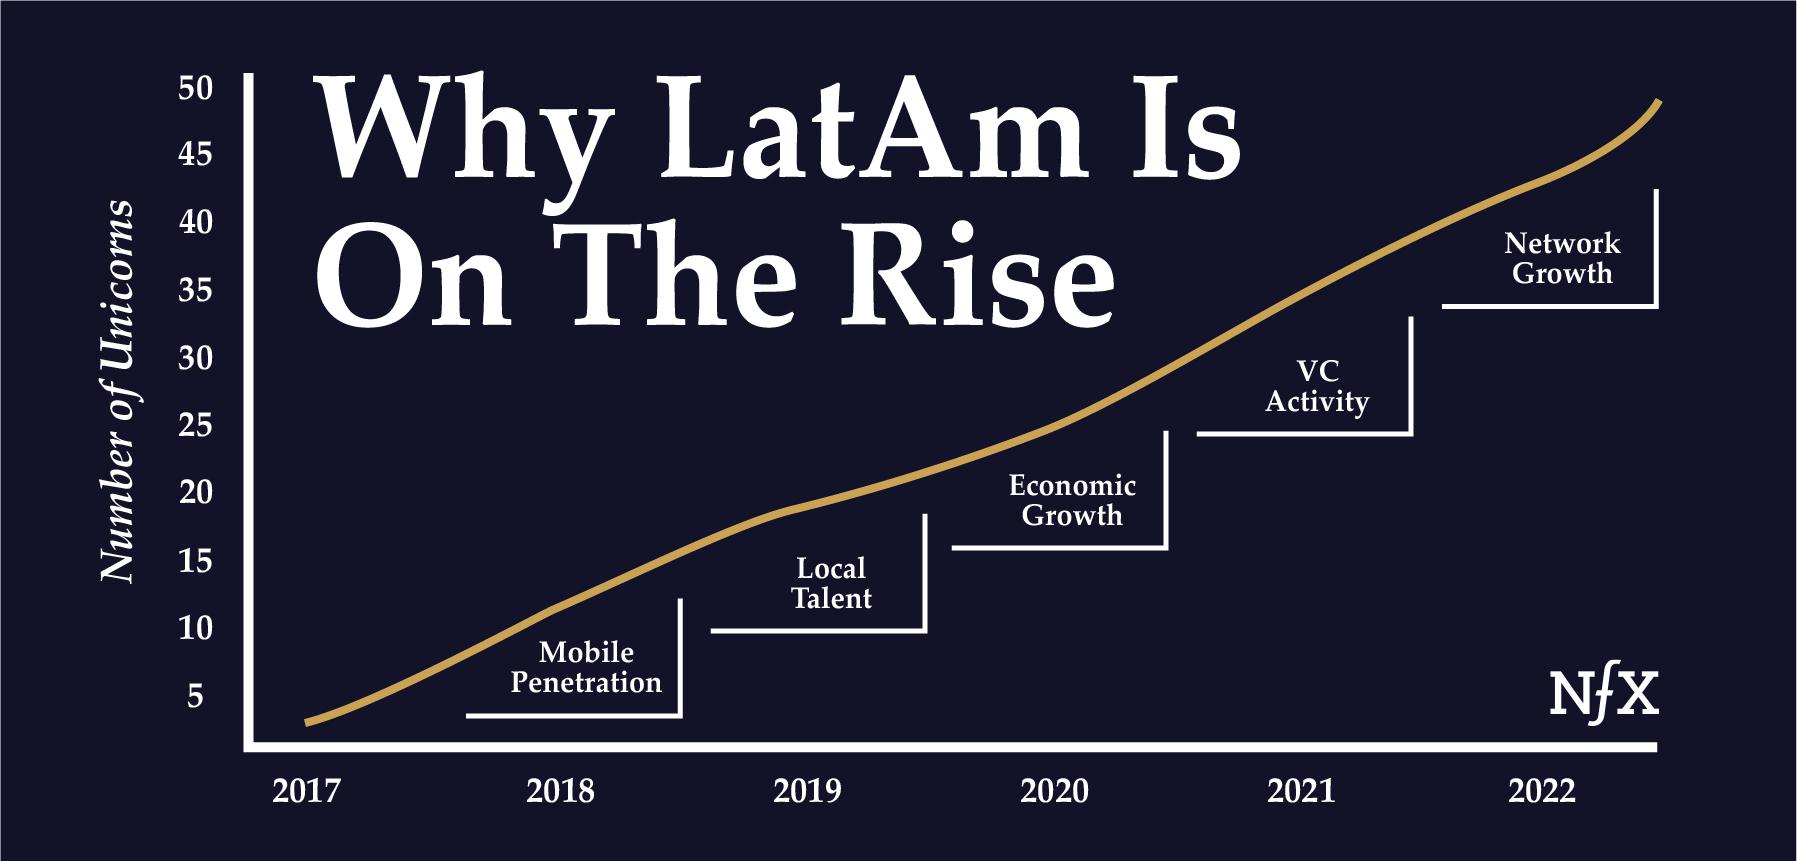 Why LatAm Is On The Rise